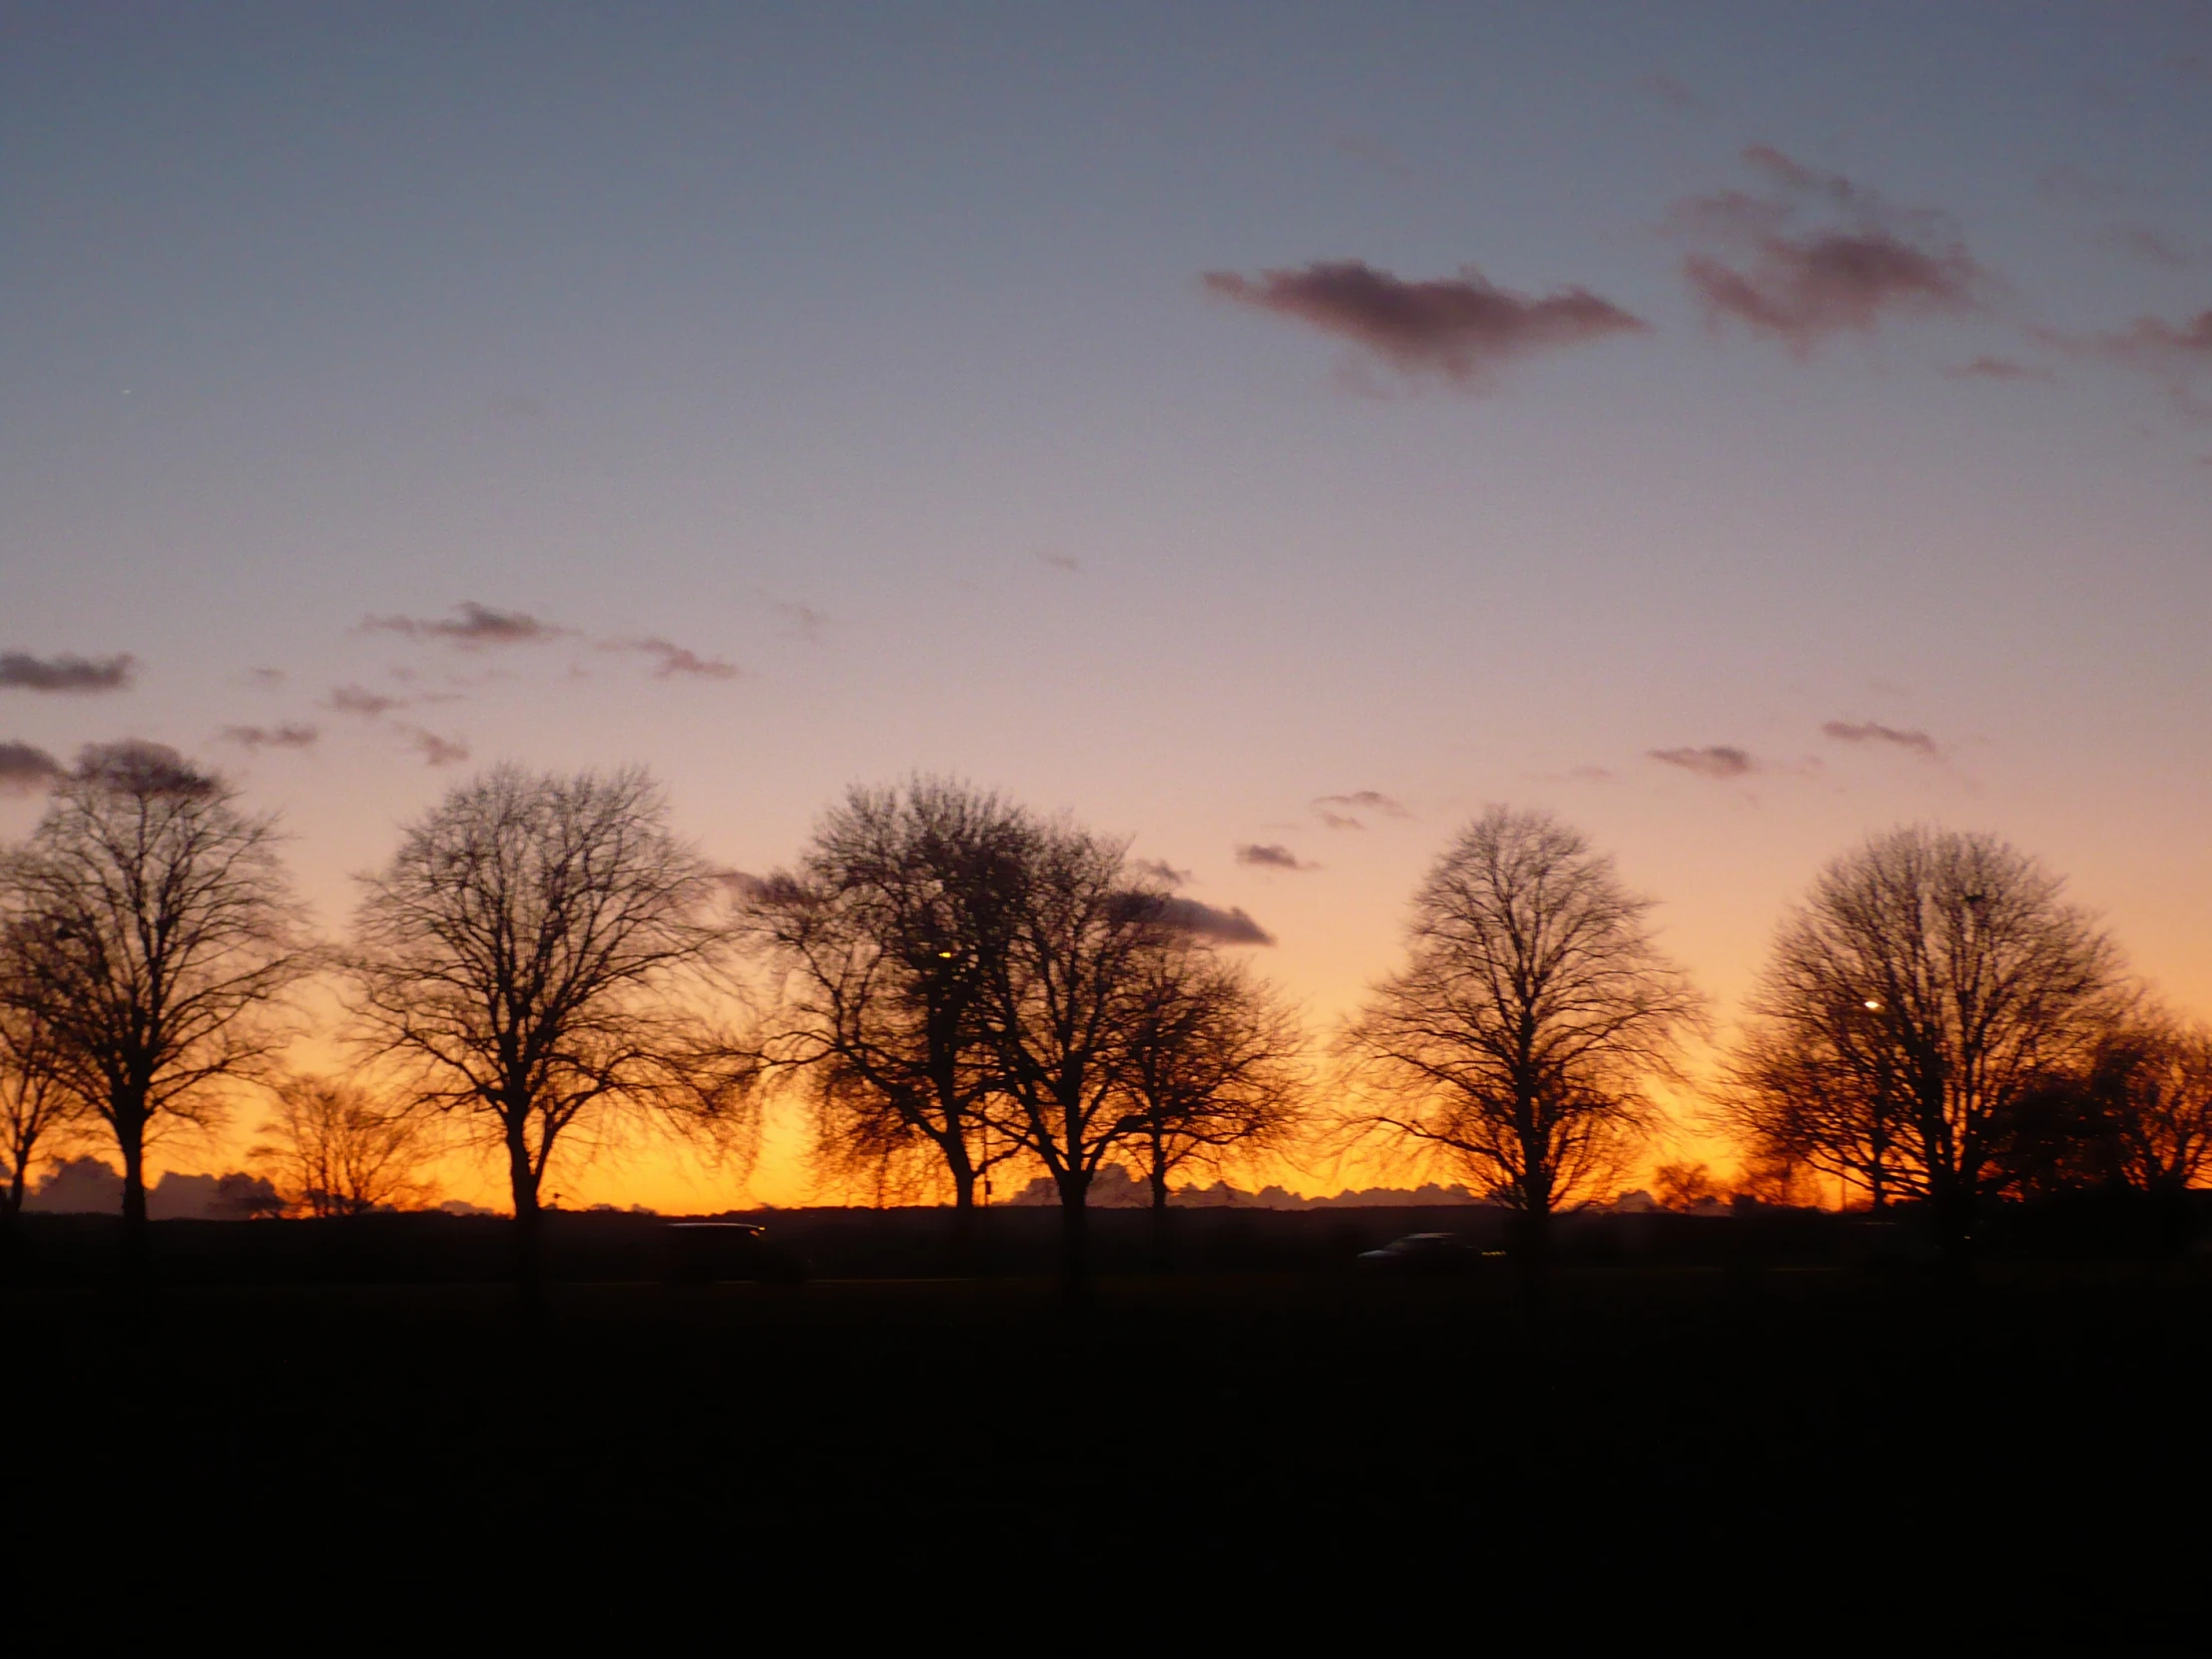 a sunset with trees in silhouette in the background